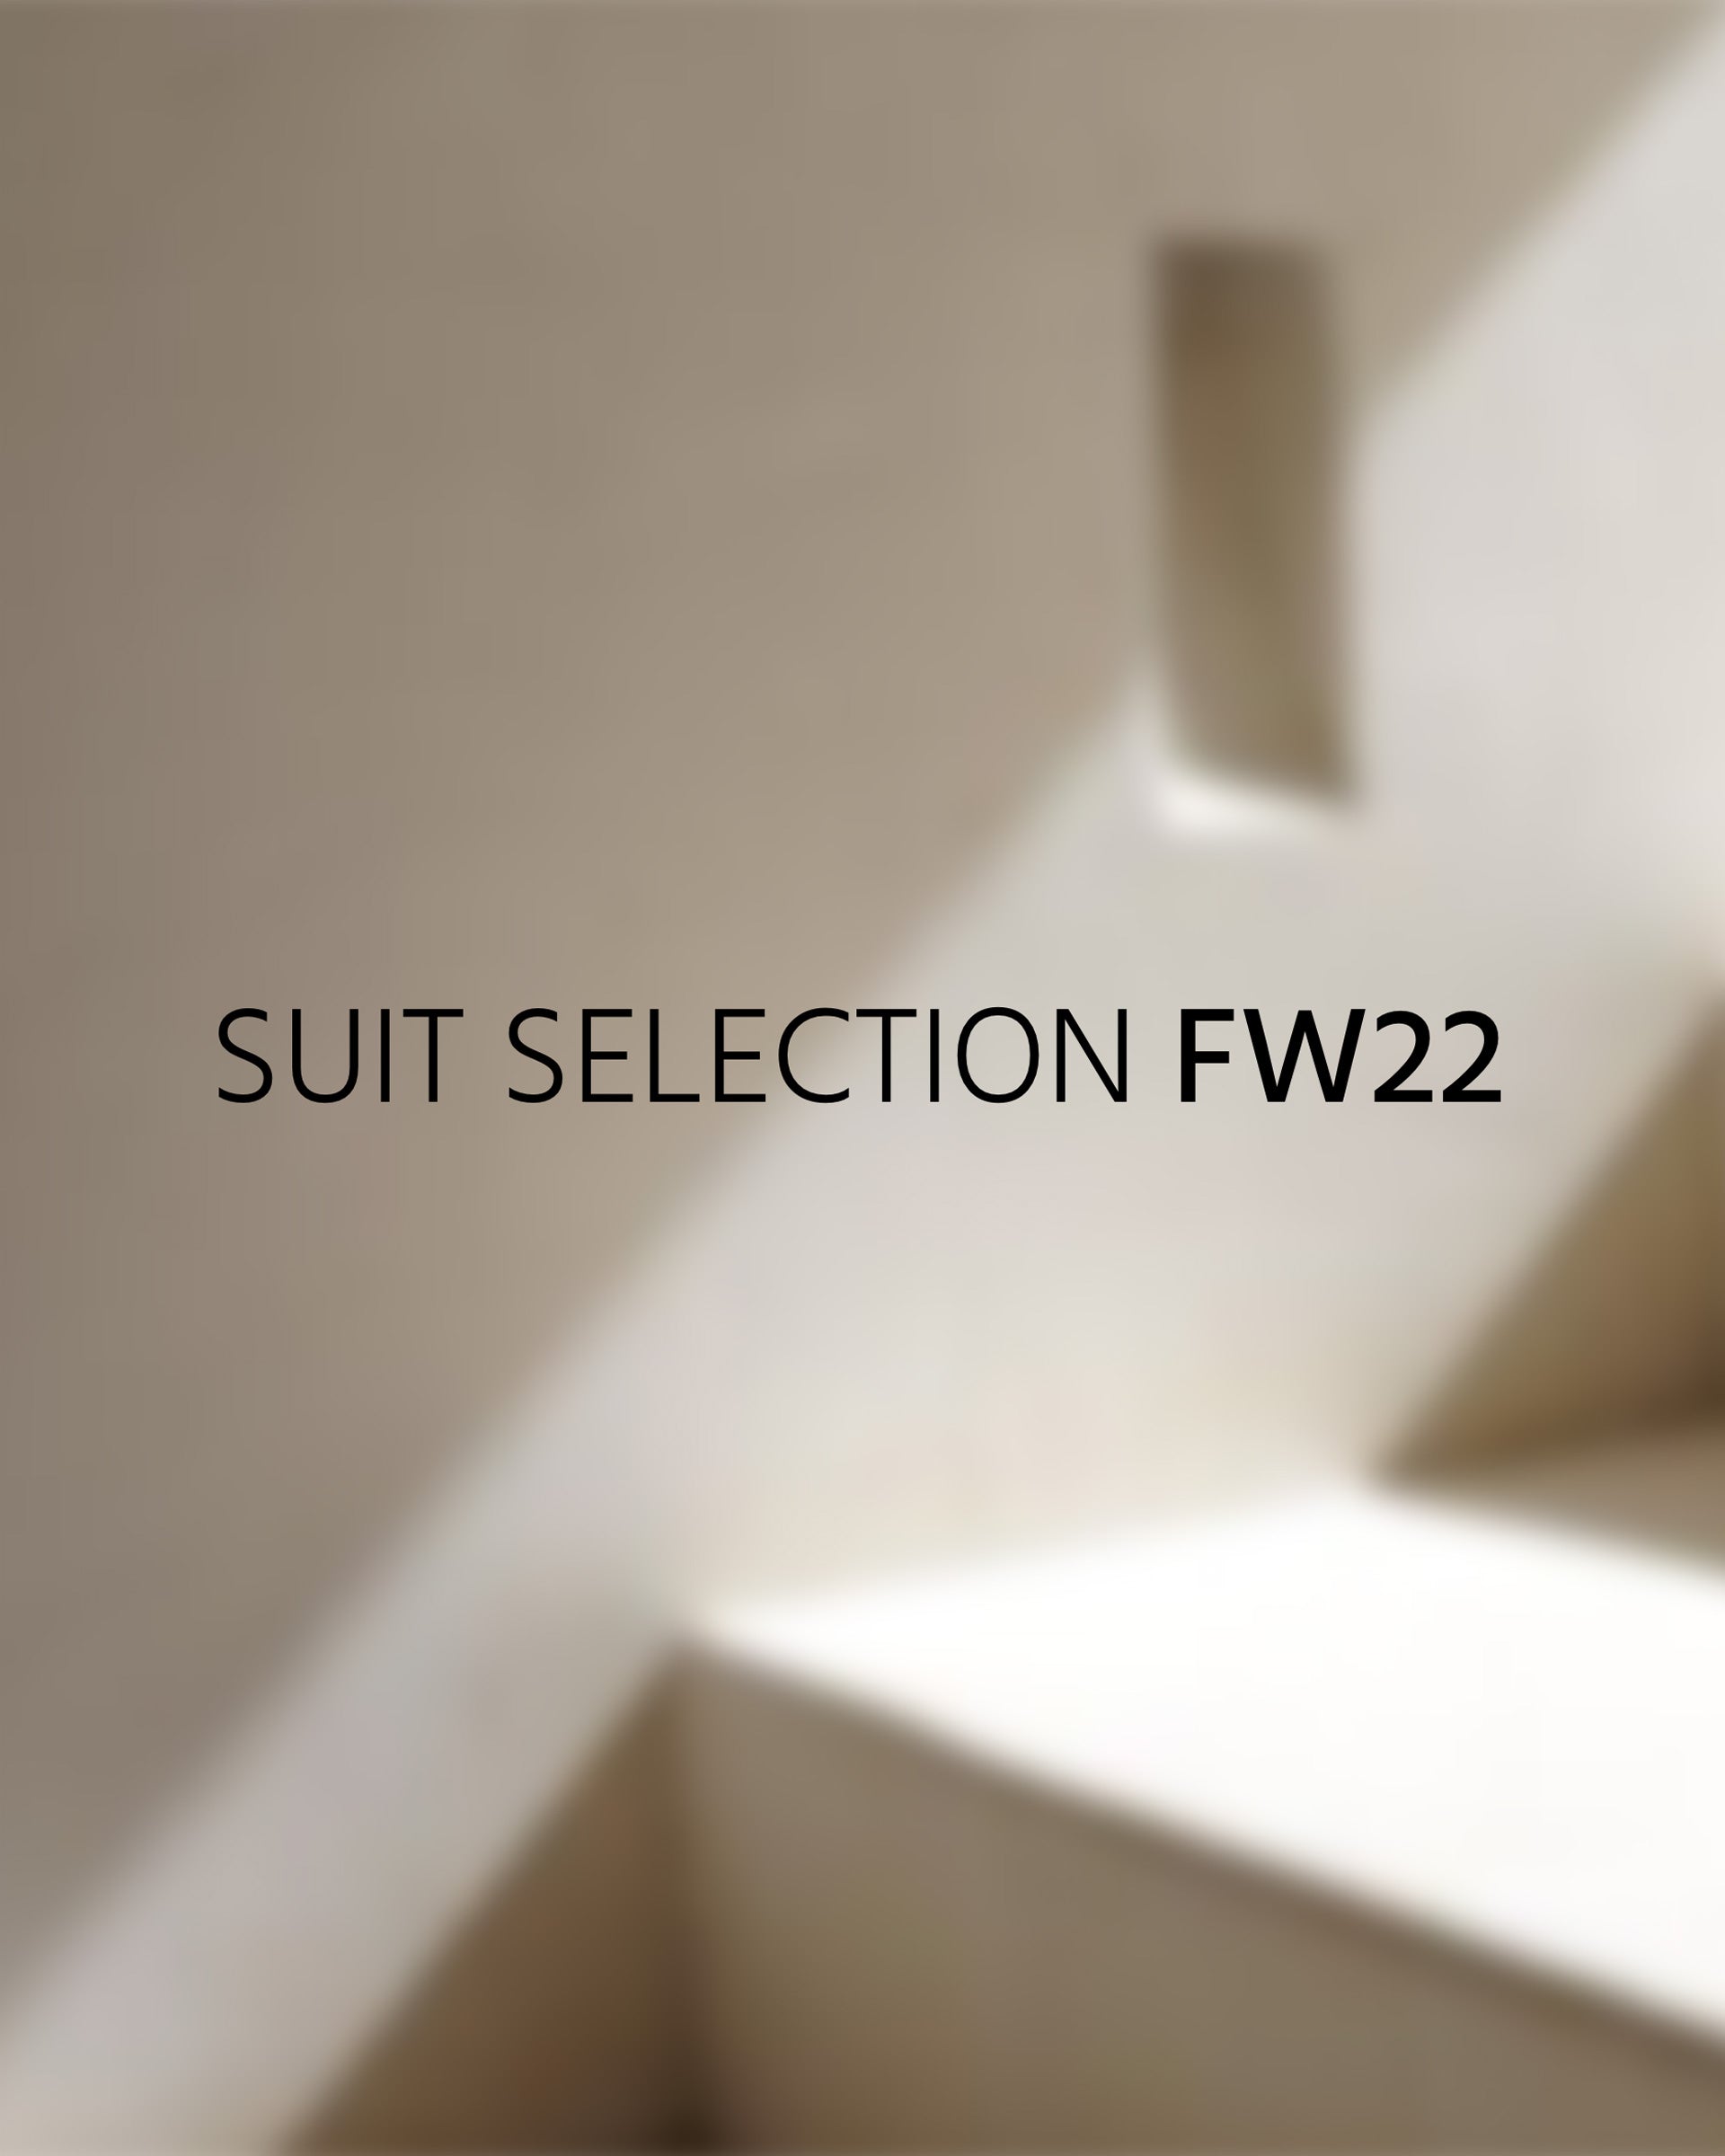 SUIT SELECTION FW22